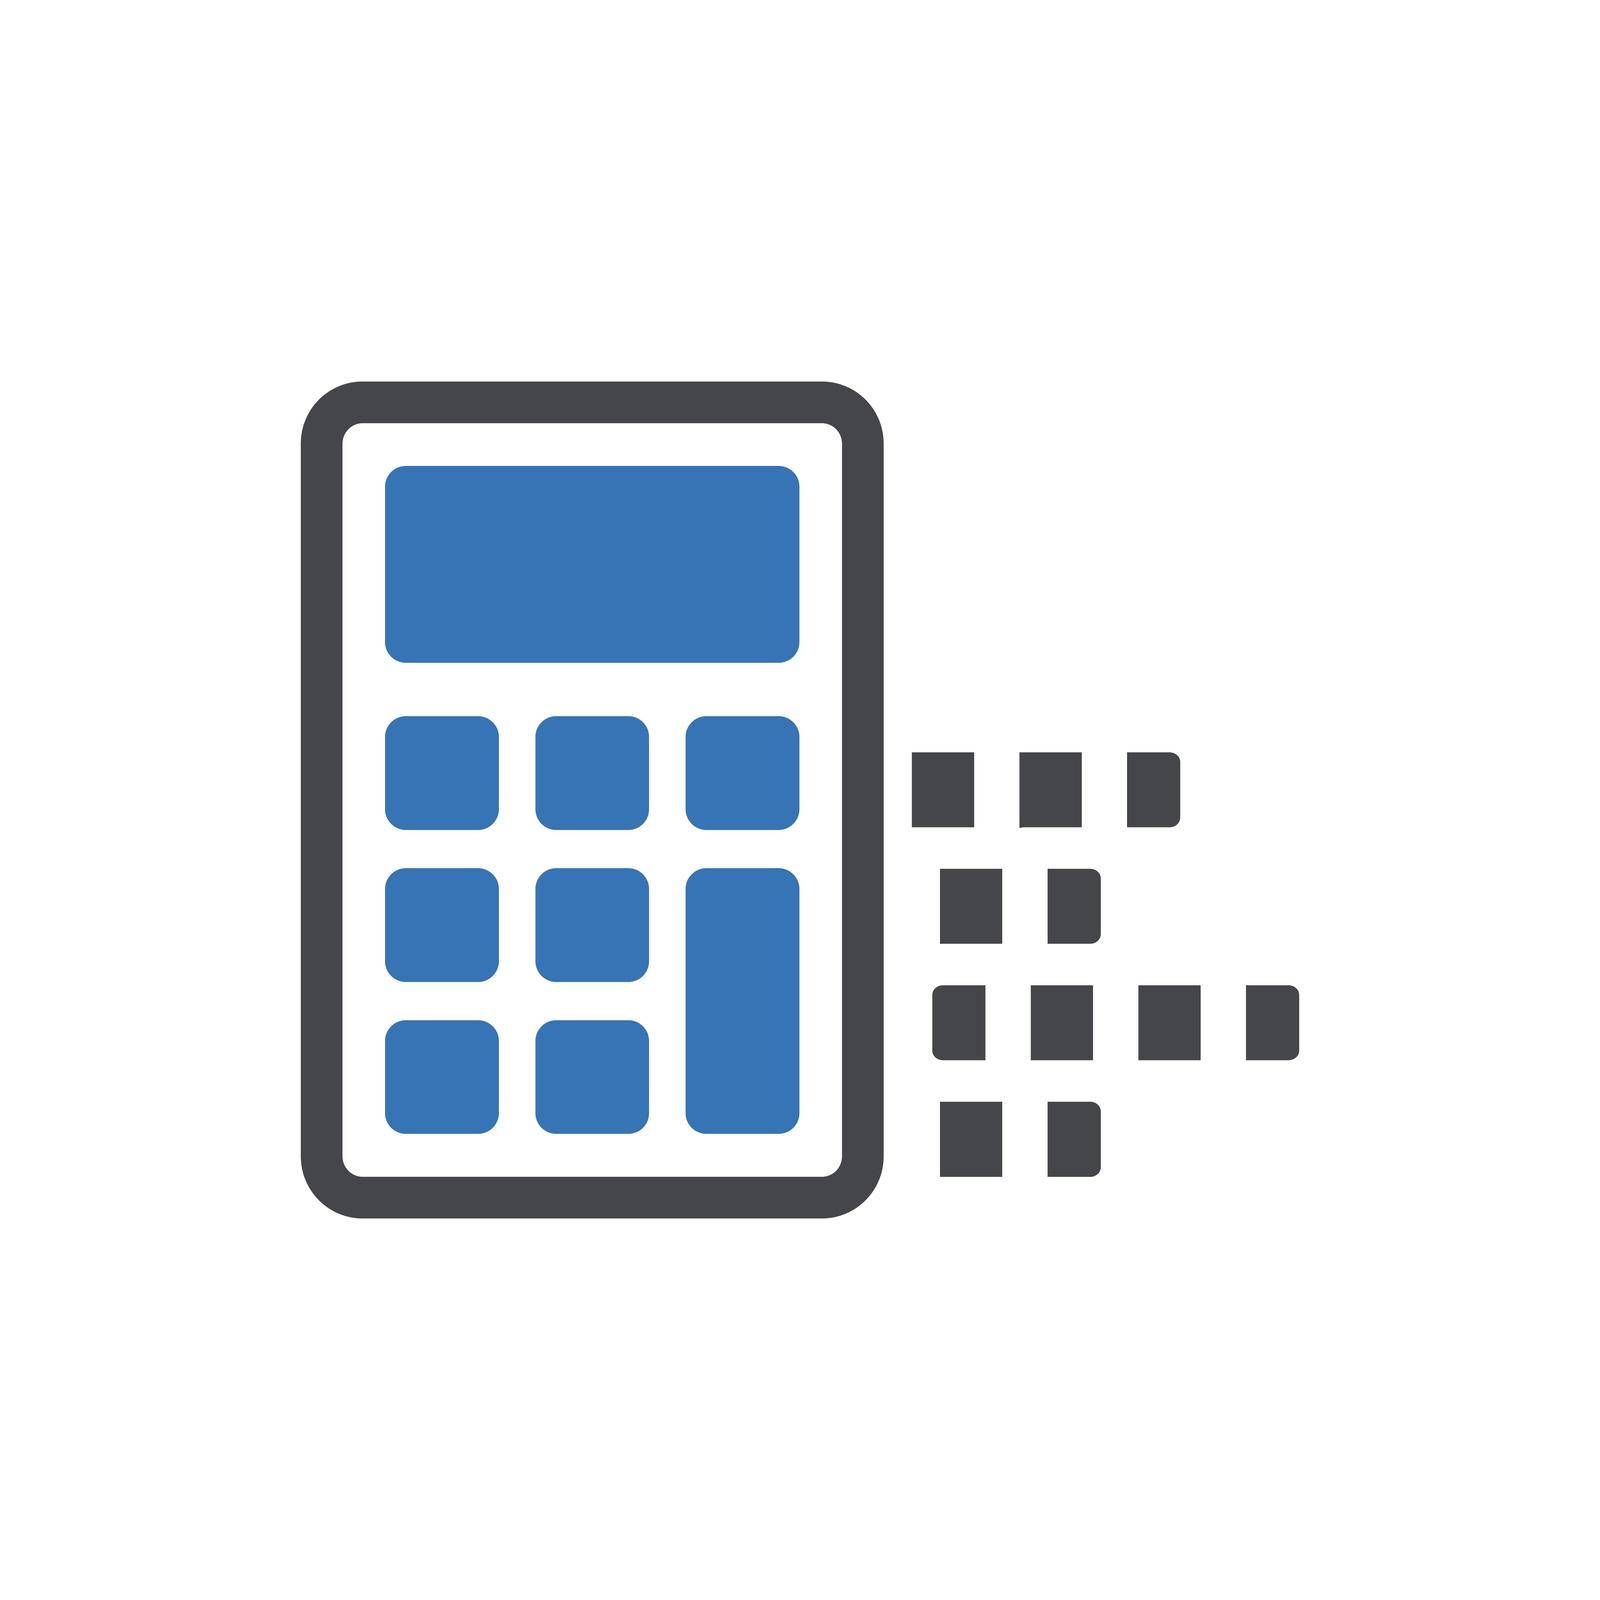 calculator Vector illustration on a transparent background. Premium quality symbols. Stroke vector icons for concept and graphic designs.